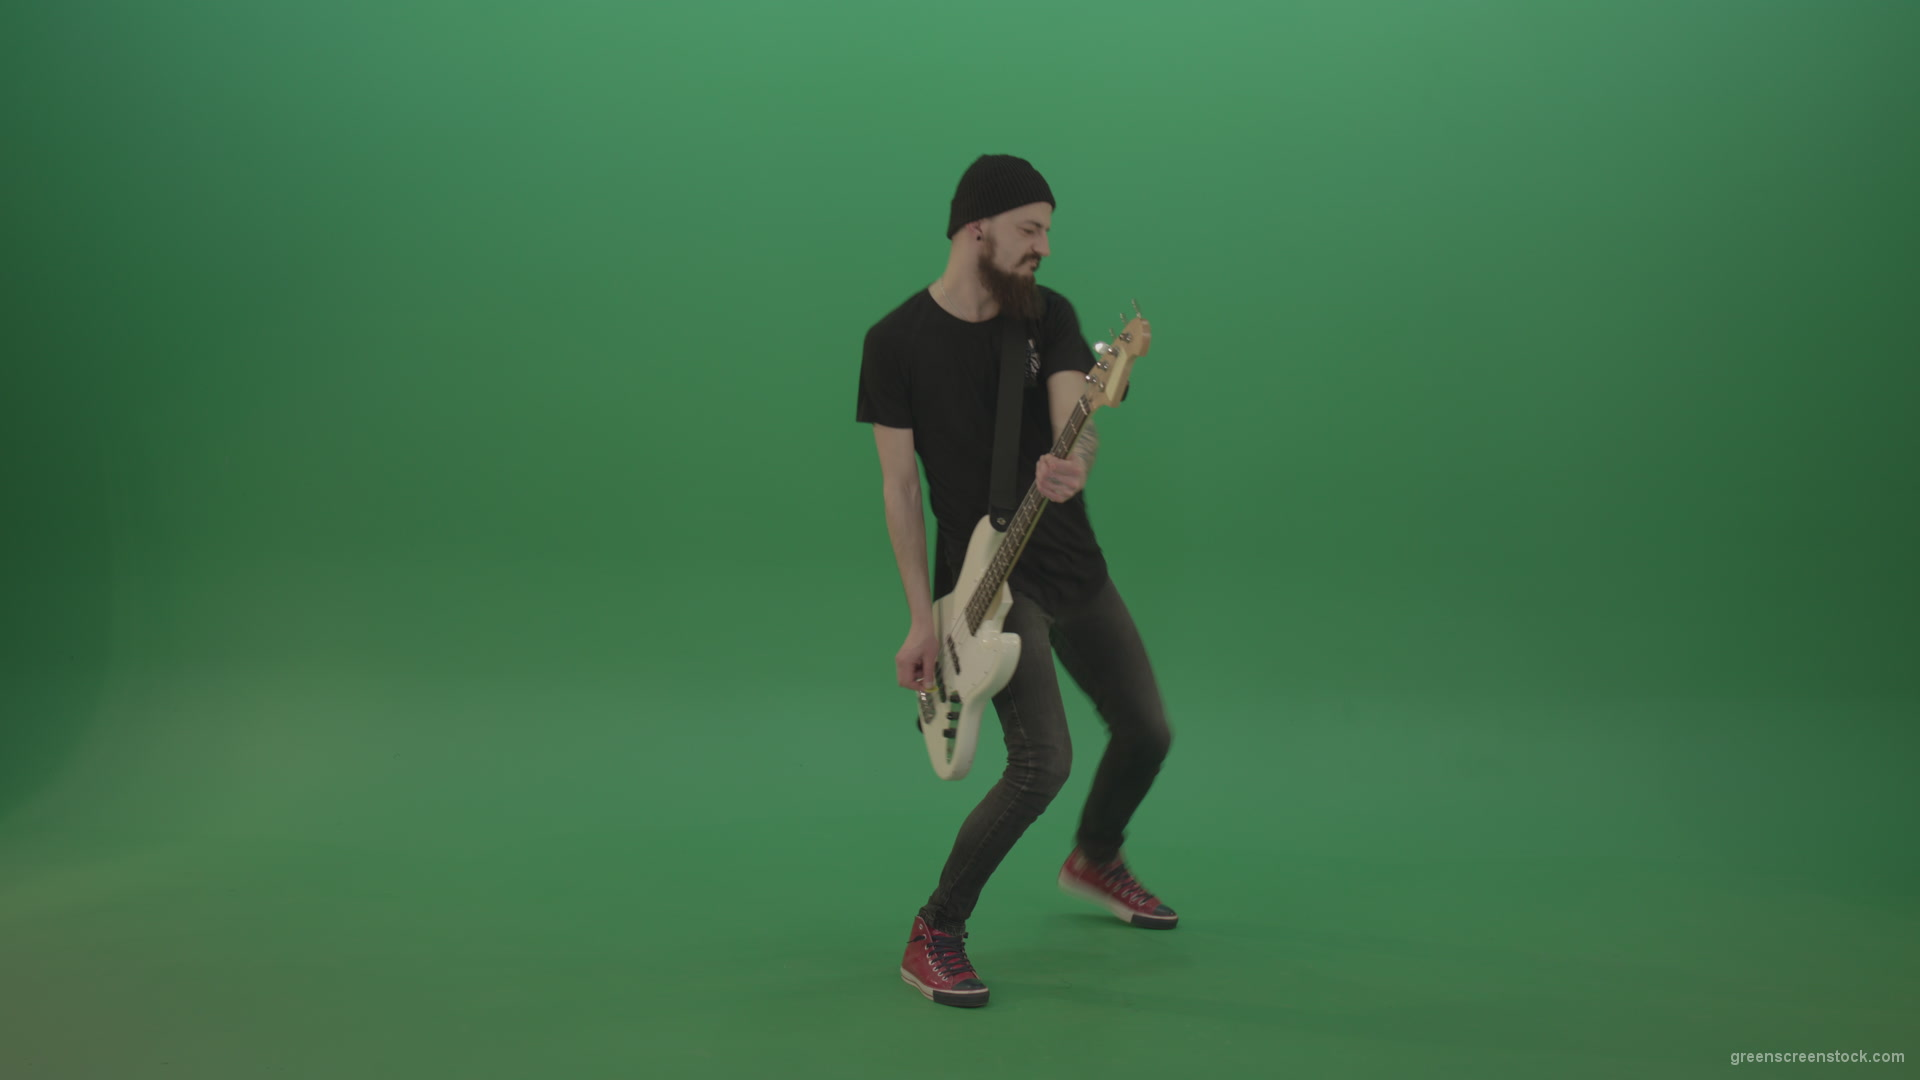 Man-play-music-instrument-bass-guitar-isolated-on-green-screen_006 Green Screen Stock